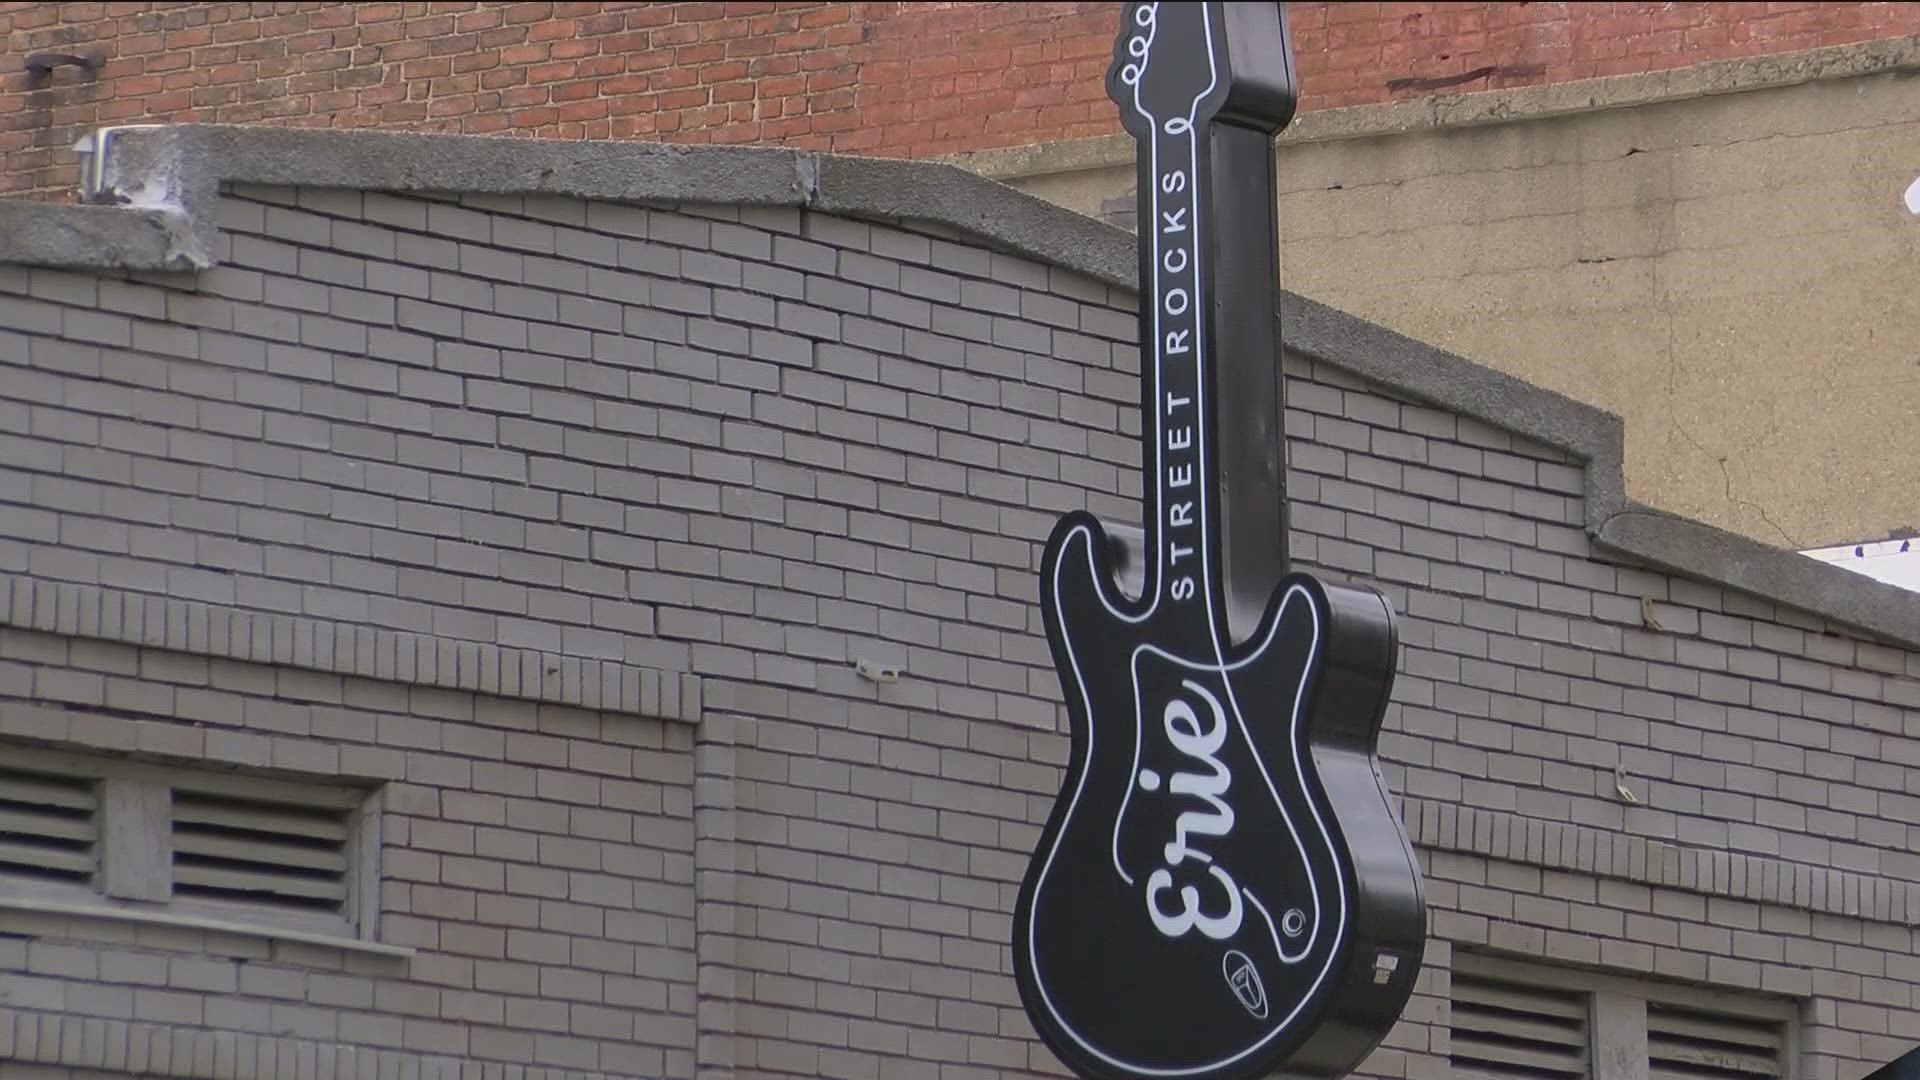 Two doors down from his popular country-themed bar in downtown Toledo, owner Cleo Smitty plans to do it again, this time with a rock twist.